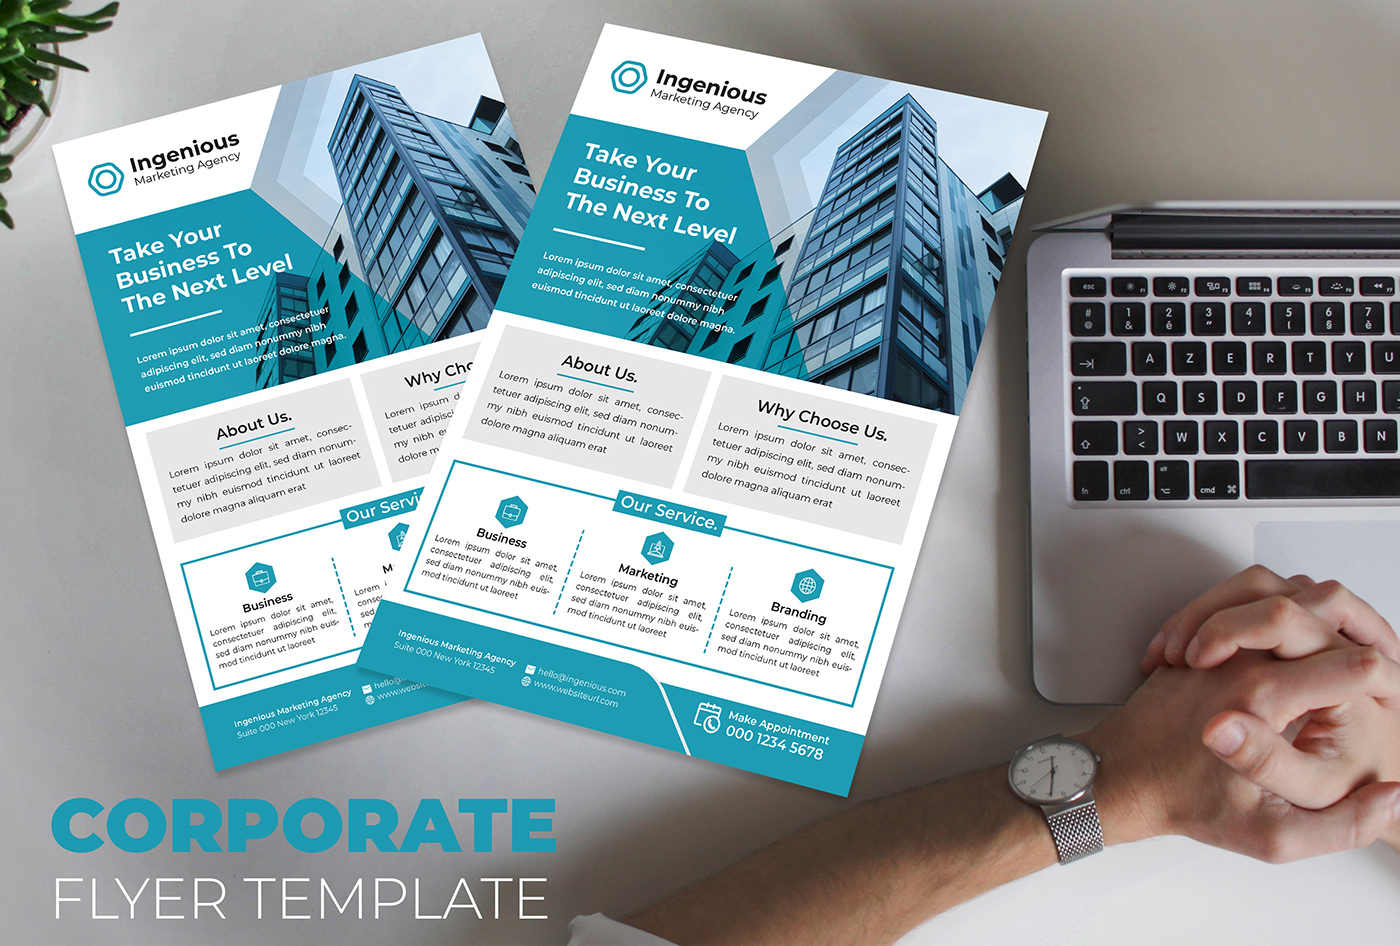 Corporate Business Flyer Template Design By Ingenious Artist Team.